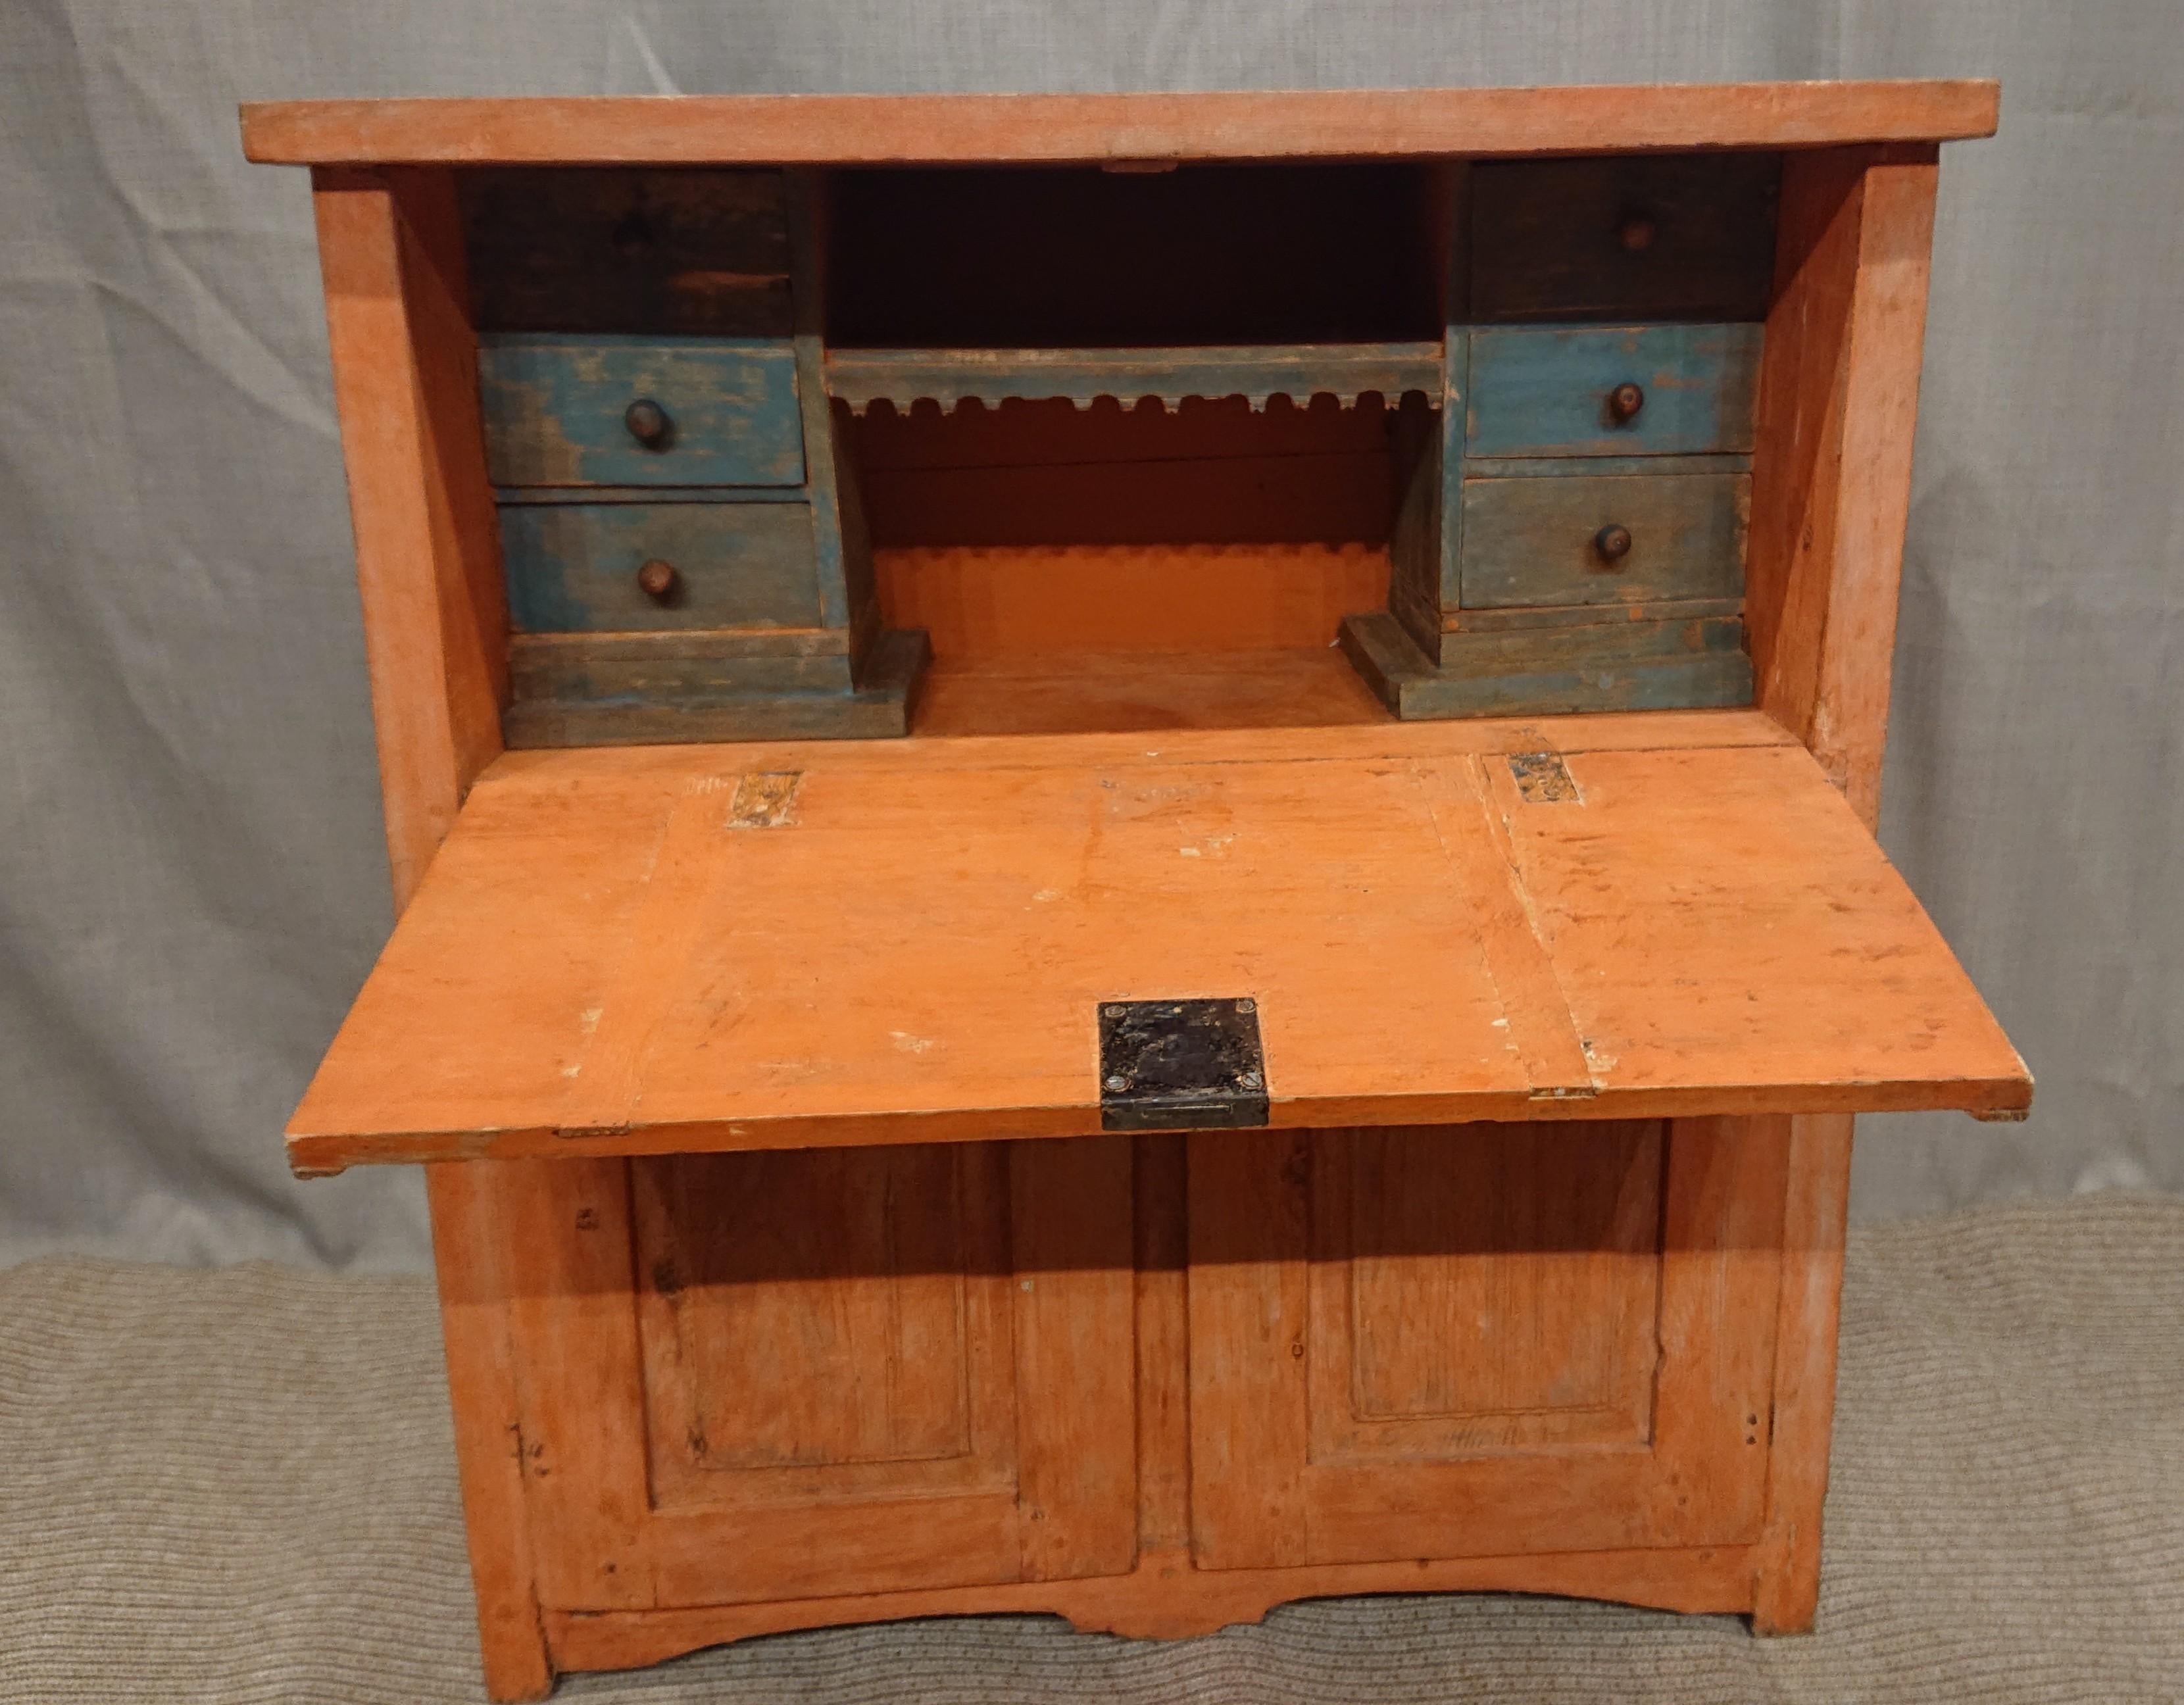 19th century Swedish Gustavian fall front desk from Burtrask Vasterbotten, Northern Sweden.
Scraped by hand to its original color.
Small cute model in child size.
Fits so nicely in the children´s room.
Nicely decorated inside with drawers in